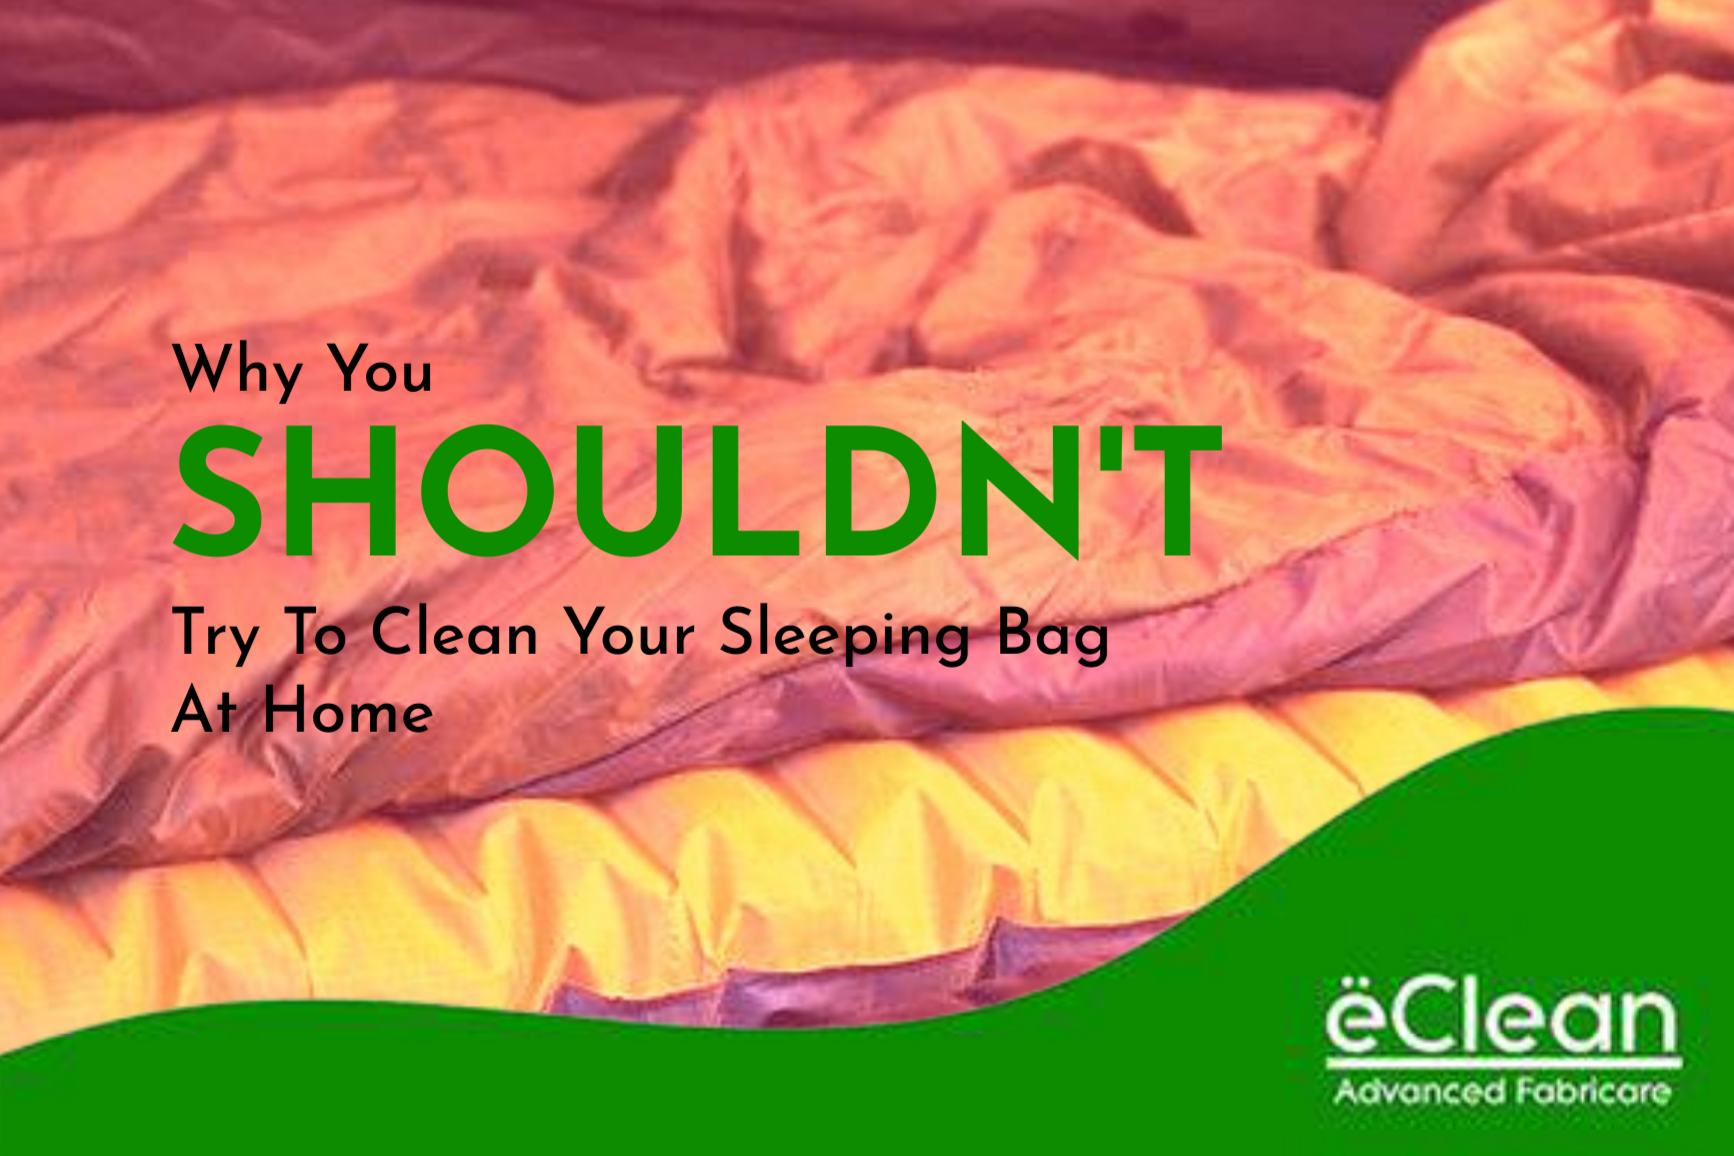 Why You Shouldn't Try and Wash Your Sleeping Bag at Home